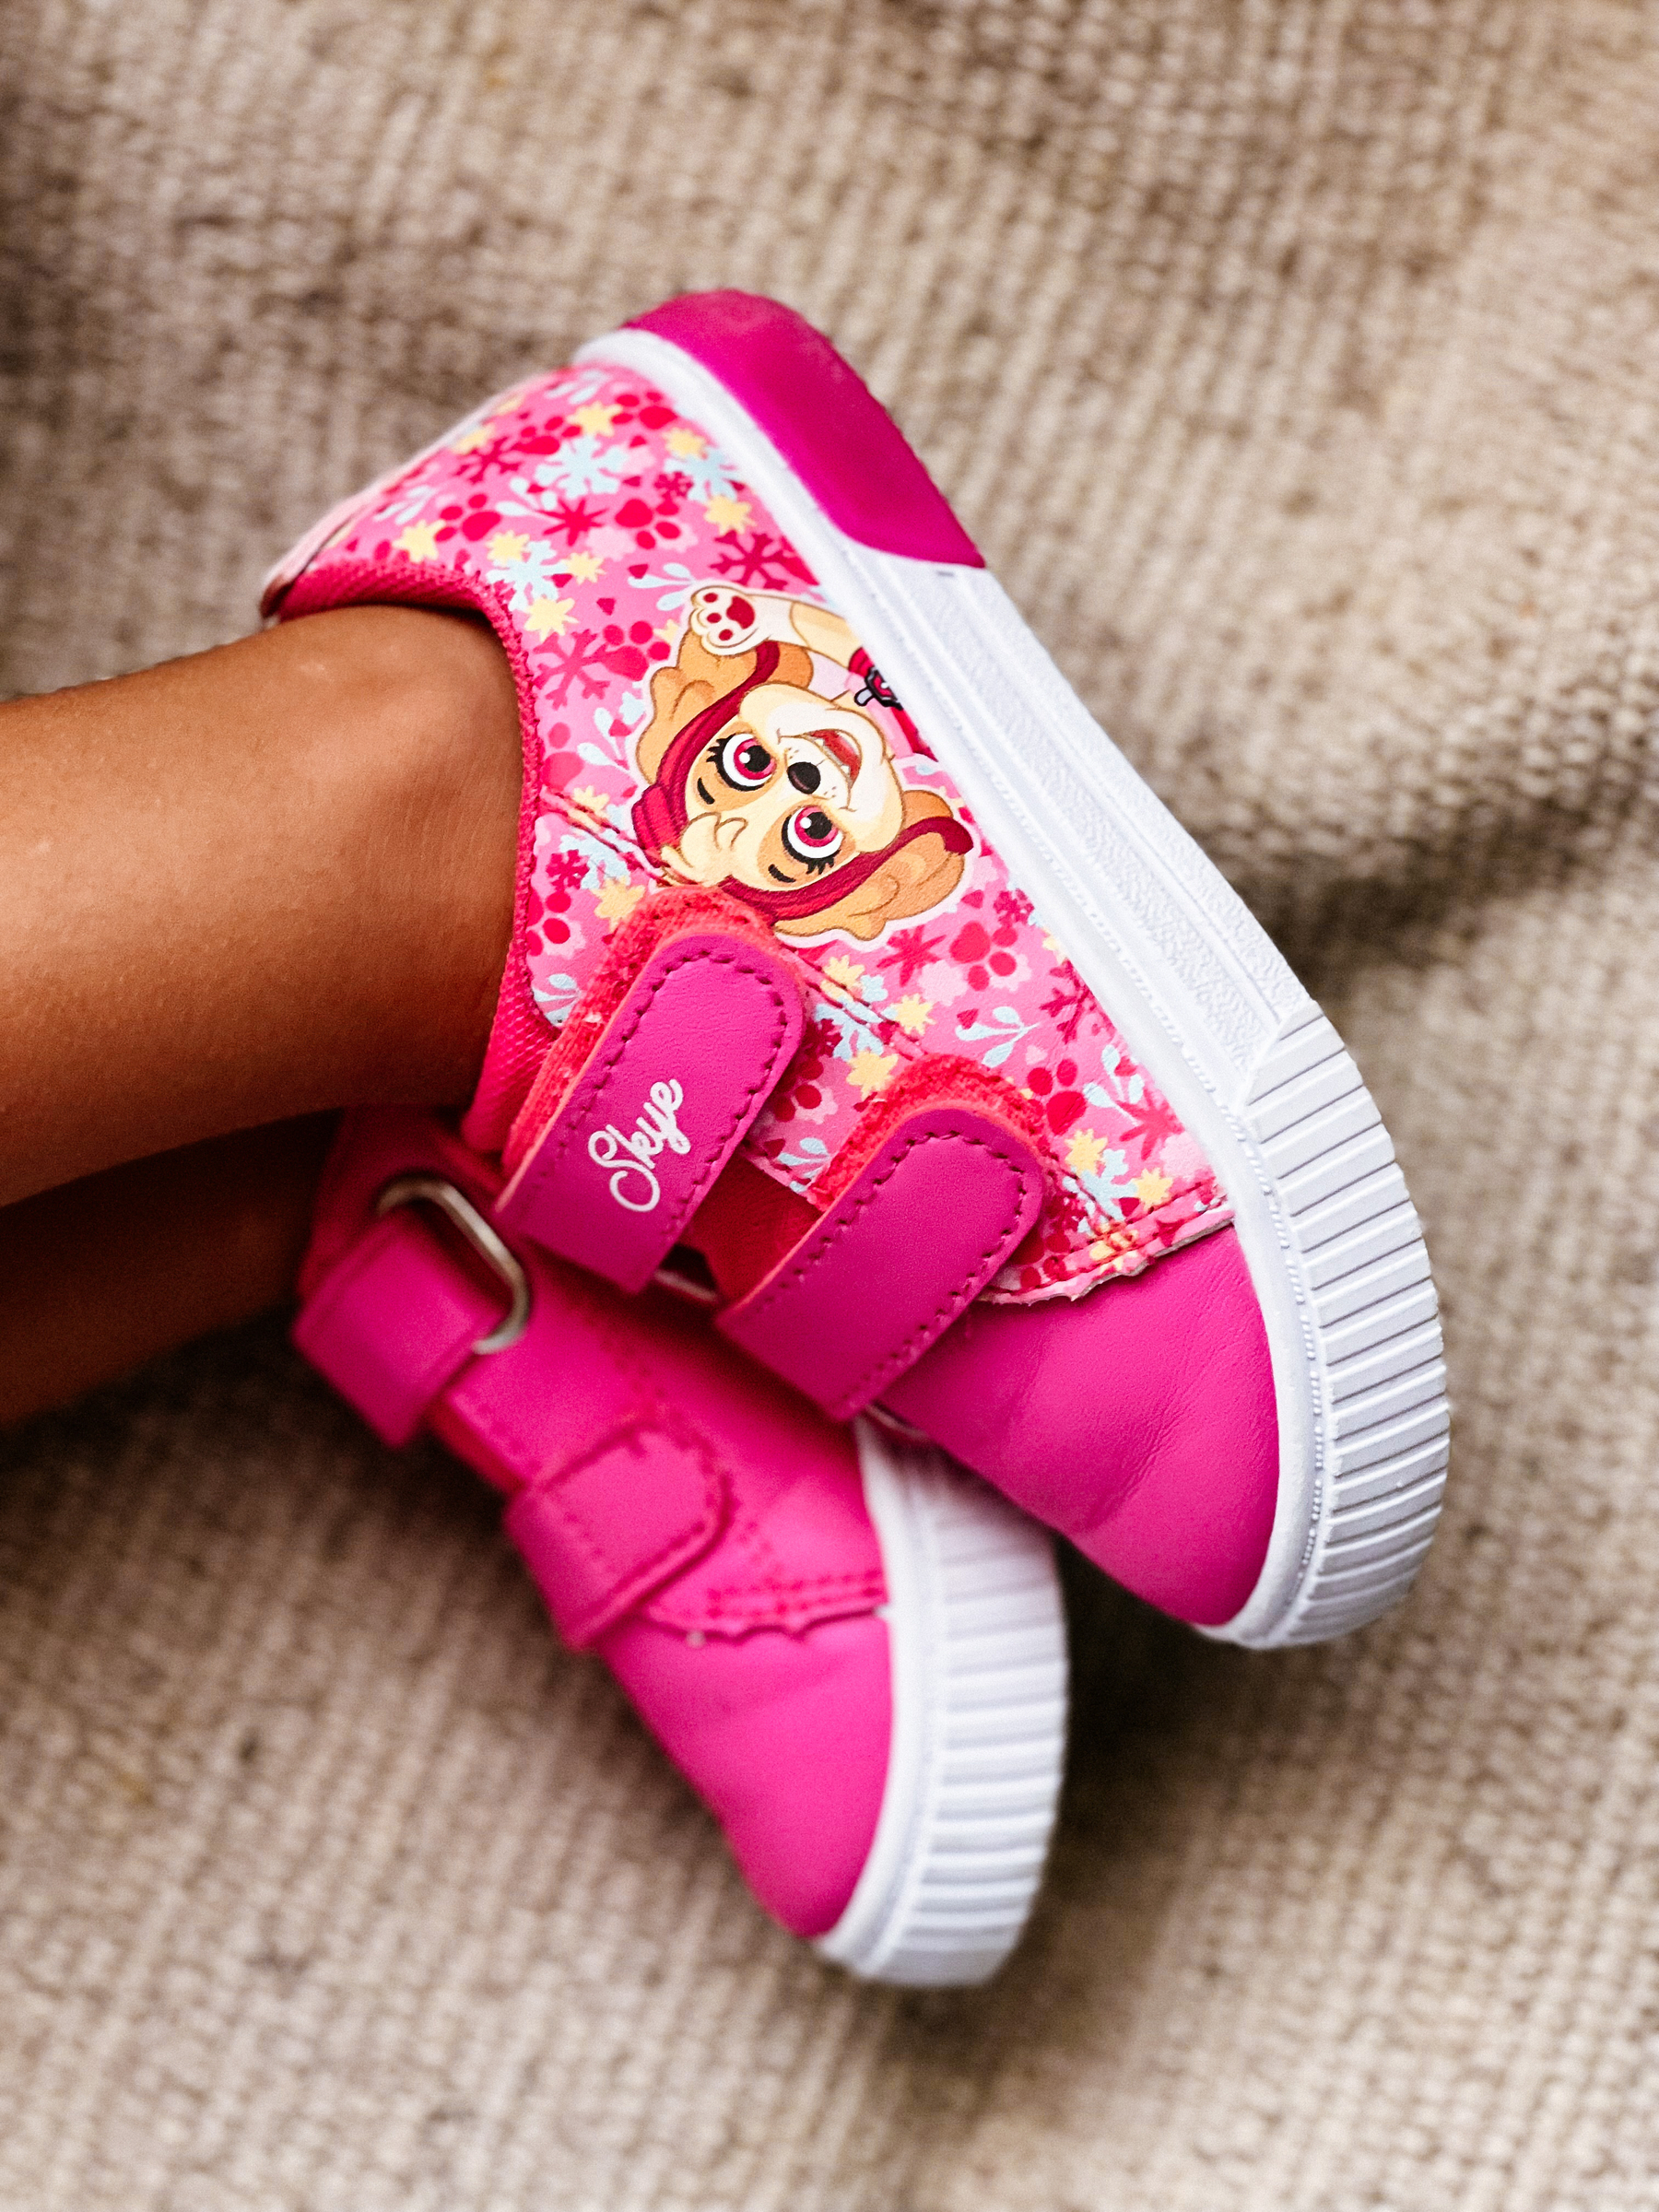 pink sneakers with Skye from Paw Patrol